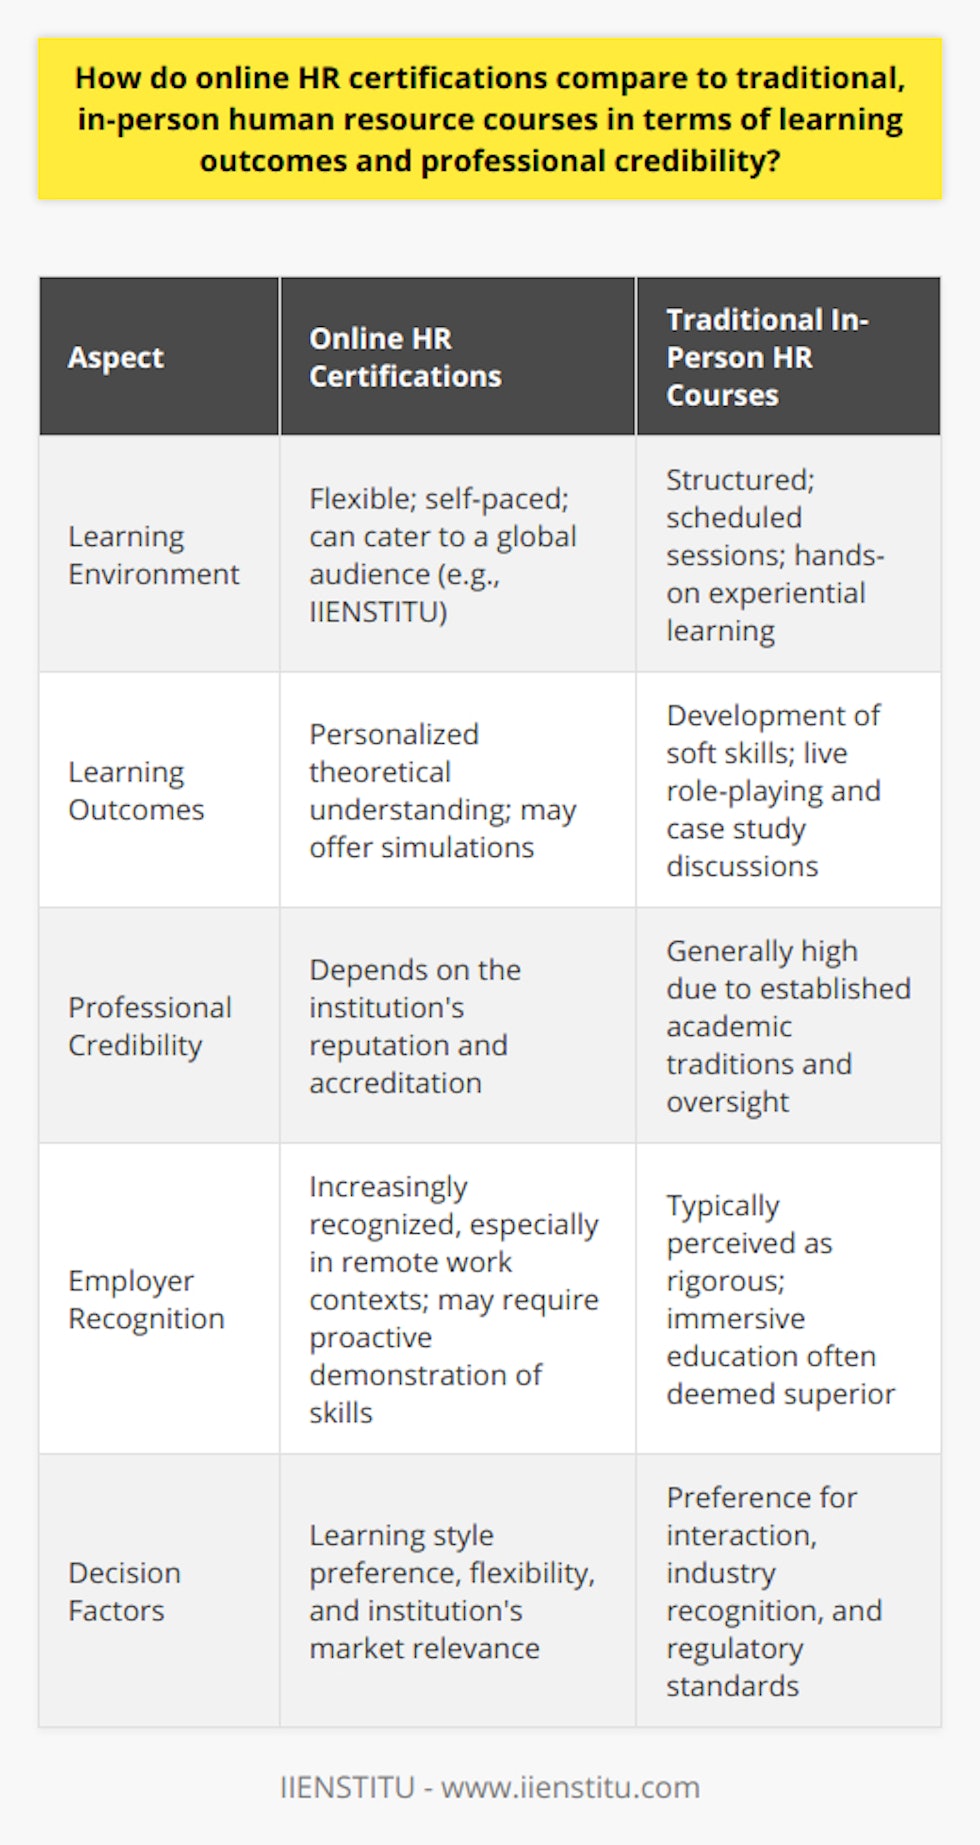 When evaluating online HR certifications against traditional in-person human resource courses, several factors come into play, including learning outcomes, professional credibility, and employer recognition. Each modality has its advantages and limitations that affect how the educational experience translates into real-world skills and job prospects.Learning Outcomes:The learning outcomes of online HR certifications hinge on their ability to provide a flexible learning environment. Many learners appreciate the capacity to move through content at their own pace, reviewing materials as needed. Such an approach can facilitate a better theoretical grasp of human resources concepts, as it allows for a personalized learning journey. IIENSTITU, for instance, offers tailored certification programs that can be accessed remotely, catering to the needs of individuals across various time zones and schedules.In contrast, traditional in-person HR courses excel in delivering hands-on, experiential learning opportunities. Direct engagement with peers and instructors aids in developing soft skills such as communication, conflict resolution, and teamwork, which are vital for HR professionals. In-person courses also enable role-playing exercises and case study discussions, which better emulate workplace challenges.Professional Credibility:Online HR certifications have witnessed a surge in credibility due to the digitization of education. Prestigious institutions offering online courses have enhanced the value of such certifications. However, the HR community and accrediting bodies maintain stringent quality standards, which not all online programs meet. The credibility of an online HR certification is heavily dependent on the reputation of the providing institution and its accreditation status. Selecting a program from a recognized provider like IIENSTITU, which ensures a robust curriculum and industry relevance, is paramount.Traditional in-person courses typically align closely with industry standards due to long-standing academic traditions and regulatory oversight. Their established nature often leads to a higher degree of professional credibility among HR practitioners and within academic circles.Employer Recognition:Employer recognition of online HR certifications has seen a positive shift with the acceptance of online learning as a legitimate alternative to traditional education, especially in the wake of the global shift towards remote work. Nevertheless, some employers may view traditional in-person qualifications as more rigorous due to the immersive nature of the learning environment. Candidates with online certifications must therefore be proactive in demonstrating the value of their education, focusing on the outcomes and practical skills they've acquired. In addition to the certification, they should underscore any collaborative projects, simulations, or case studies they've completed, highlighting their preparedness for real-world HR roles.When choosing between online and traditional HR education pathways, individuals must weigh their personal and professional objectives against the nature of each learning format. Prospective learners should consider their learning style preferences, the level of interaction they desire, and the recognition of the program within the HR field. Regardless of the choice, the most critical factor remains the quality and reputation of the educational institution. Programs like those offered by IIENSTITU stand out due to their commitment to aligning online HR education with the demands and expectations of today's dynamic job market.